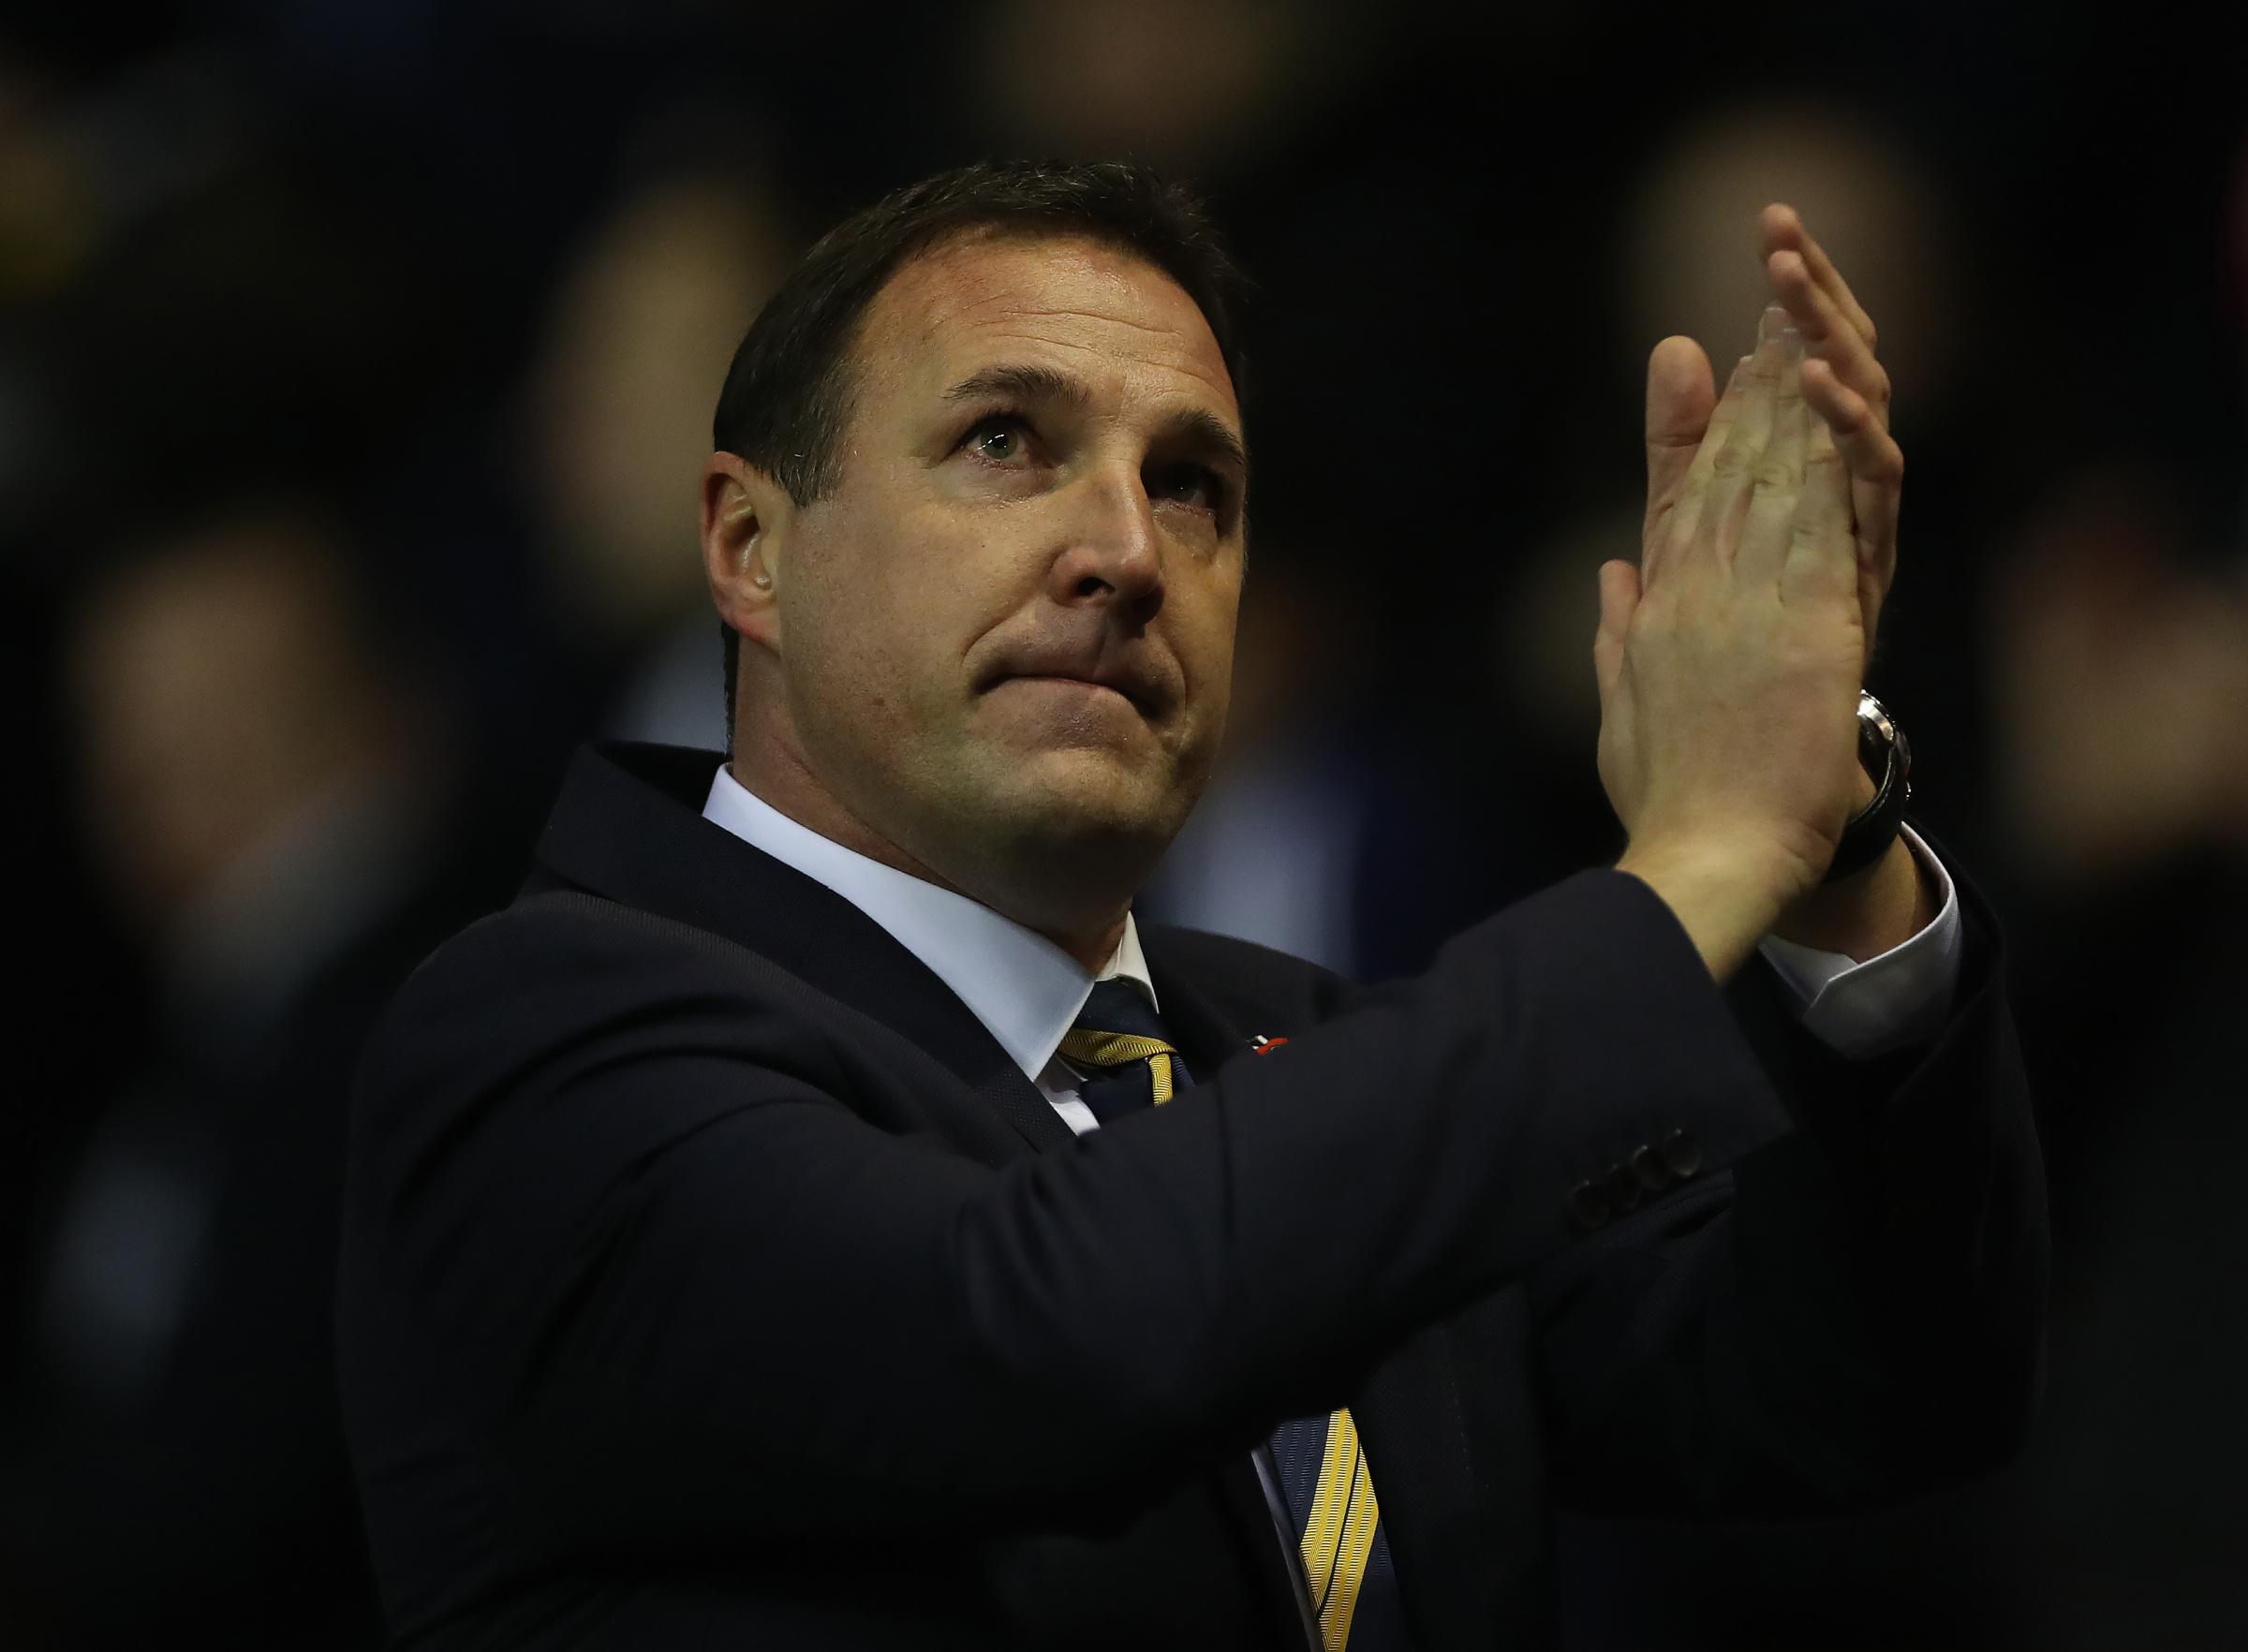 Dundee United granted permission to speak to Malky Mackay over managerial position